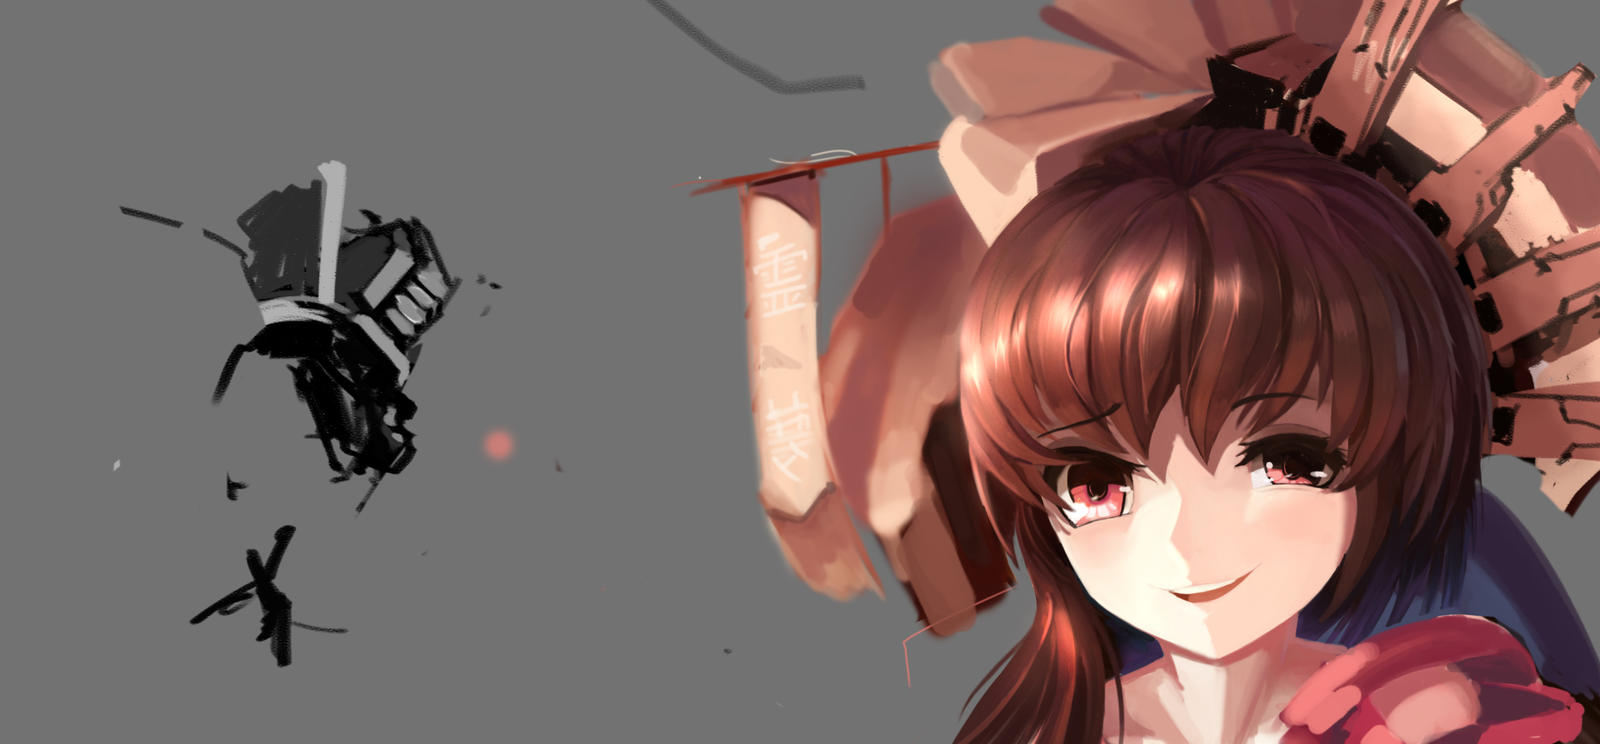 Reimu looking down on you